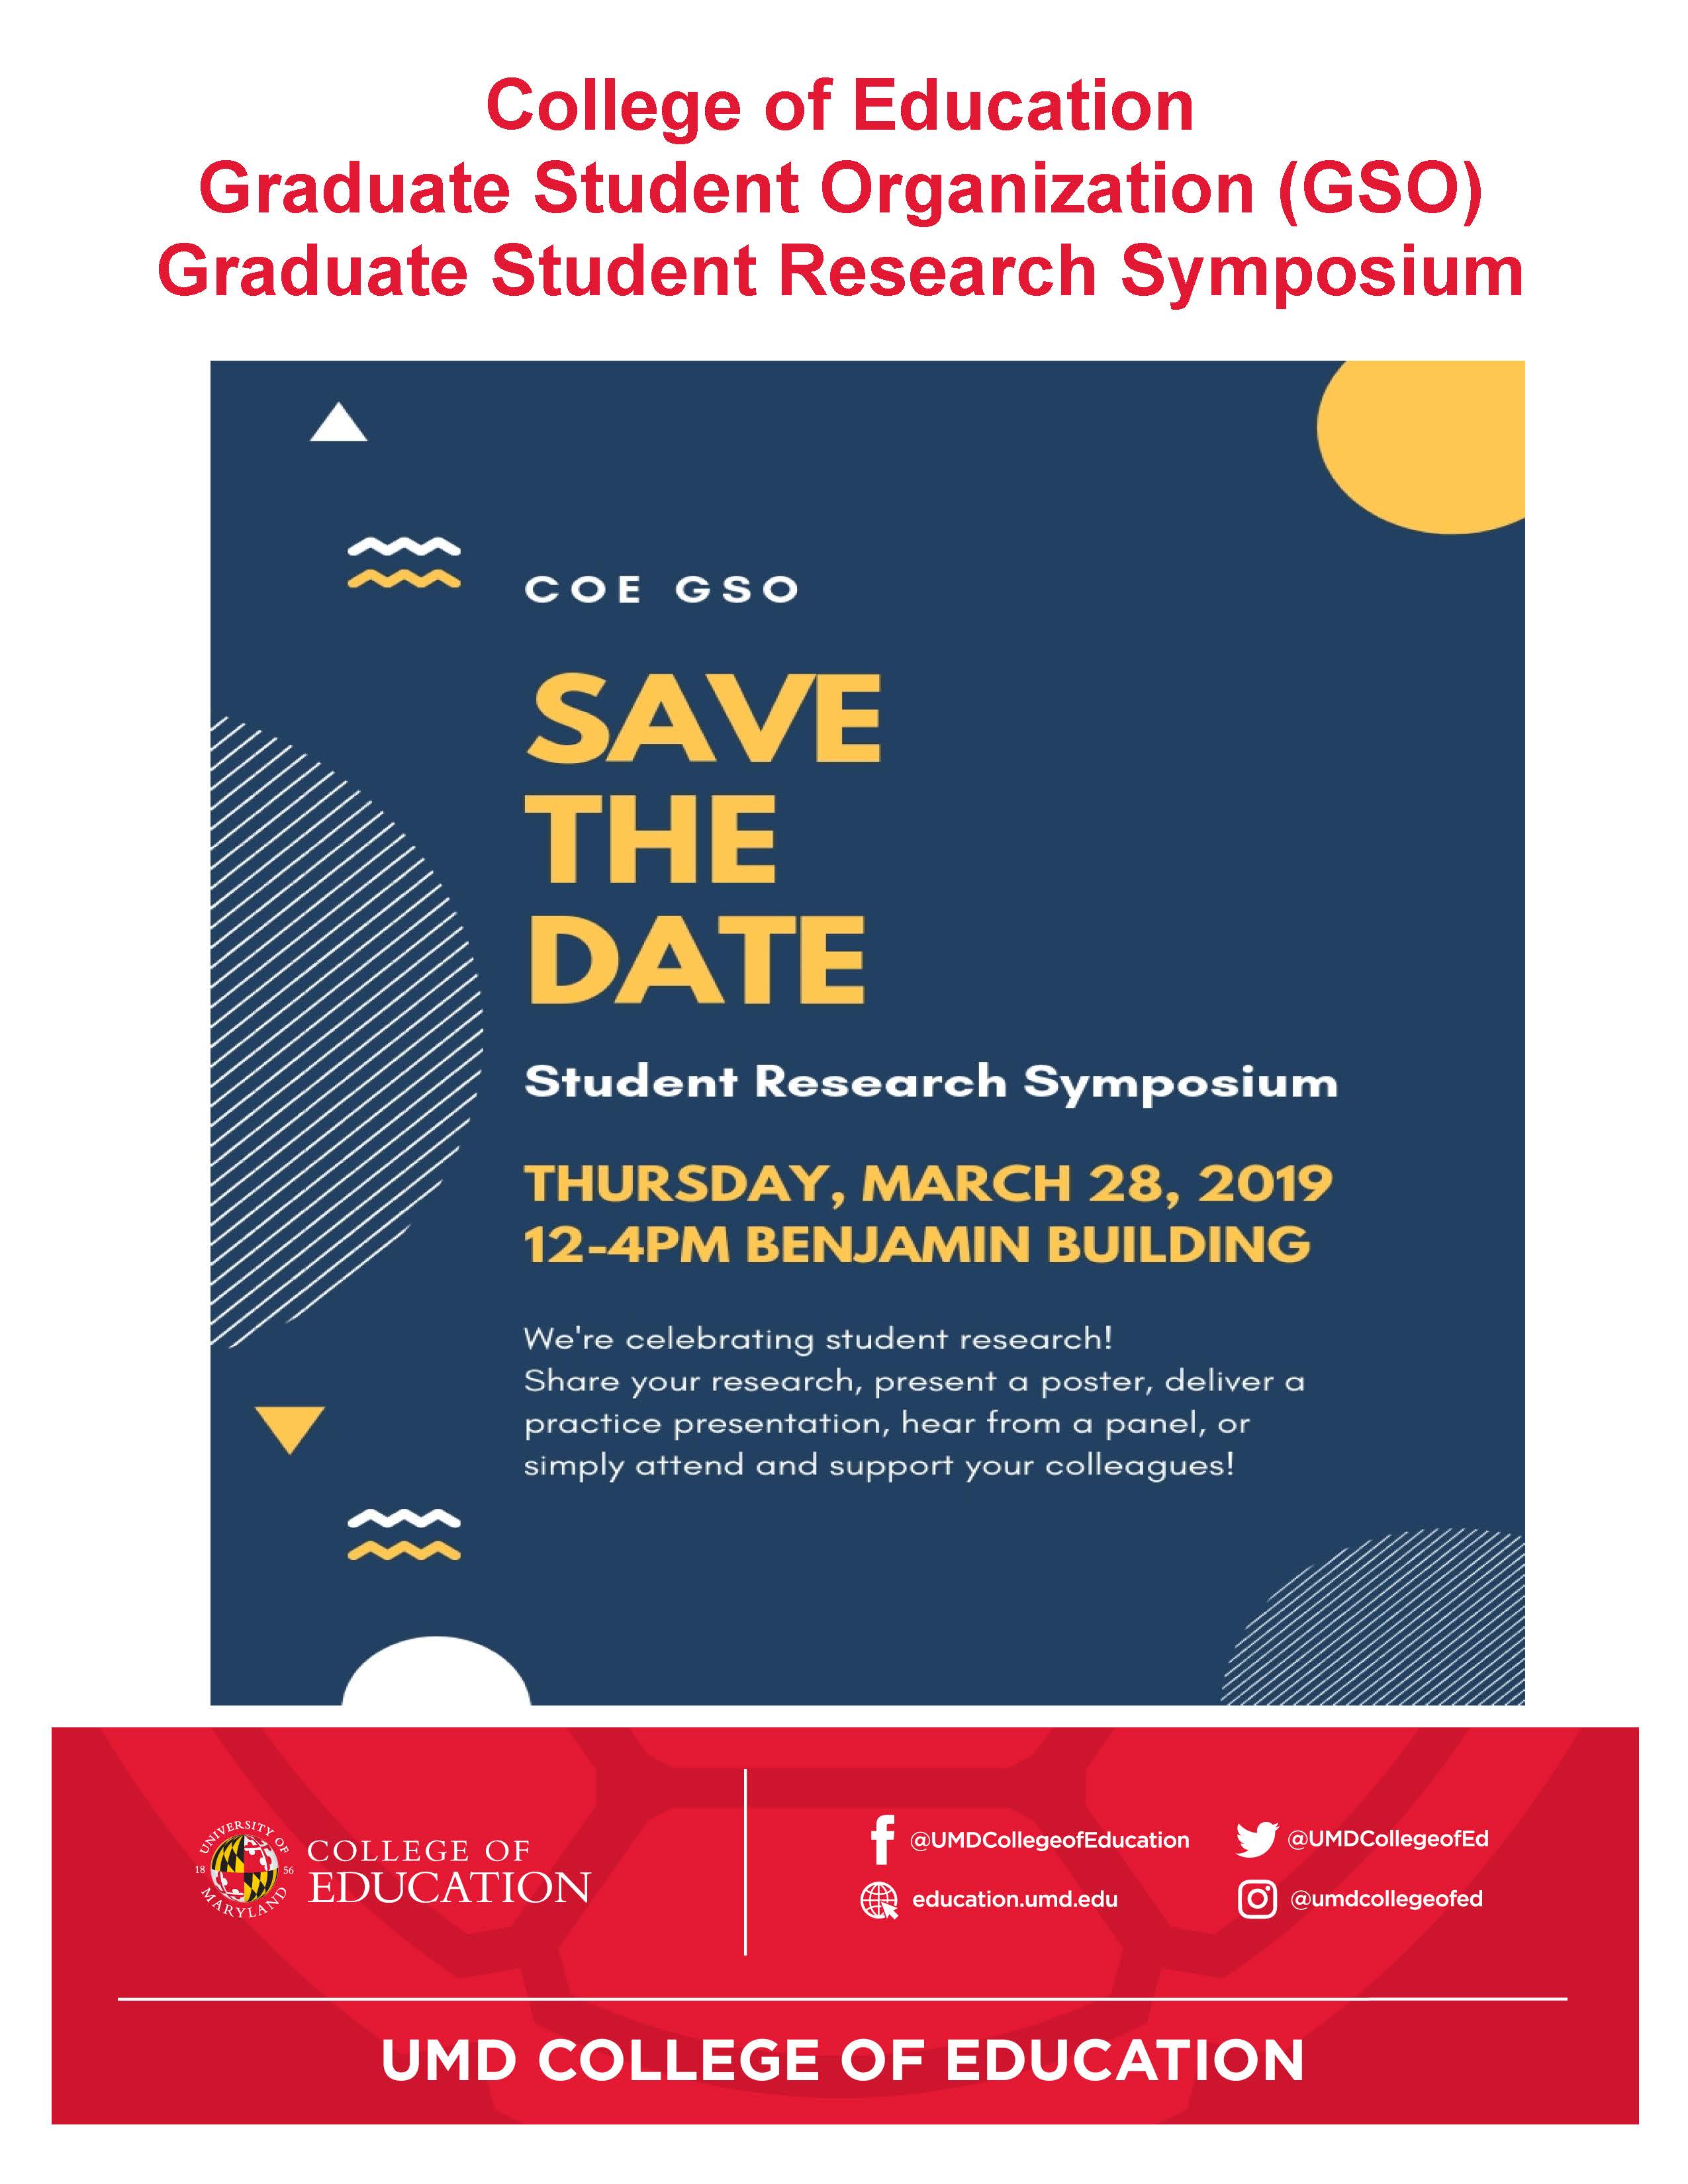 GSO Graduate Student Research Symposium (SRS)